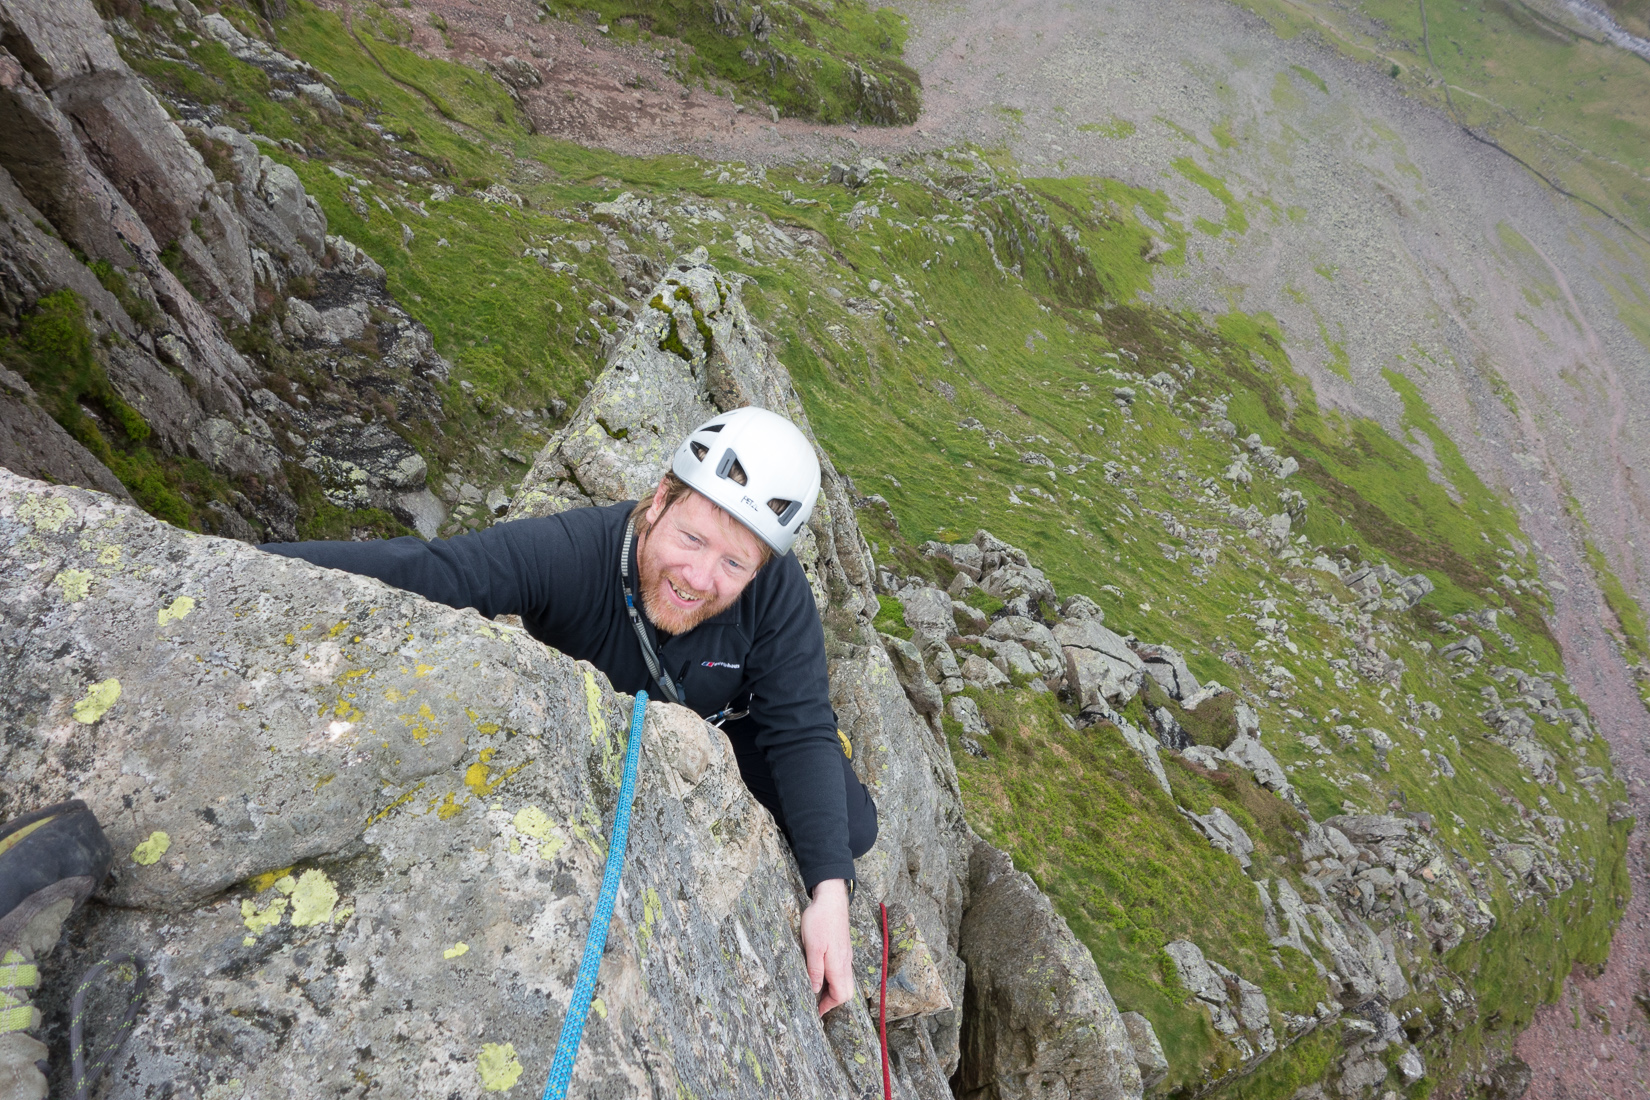 On the top pitch of Napes Needle